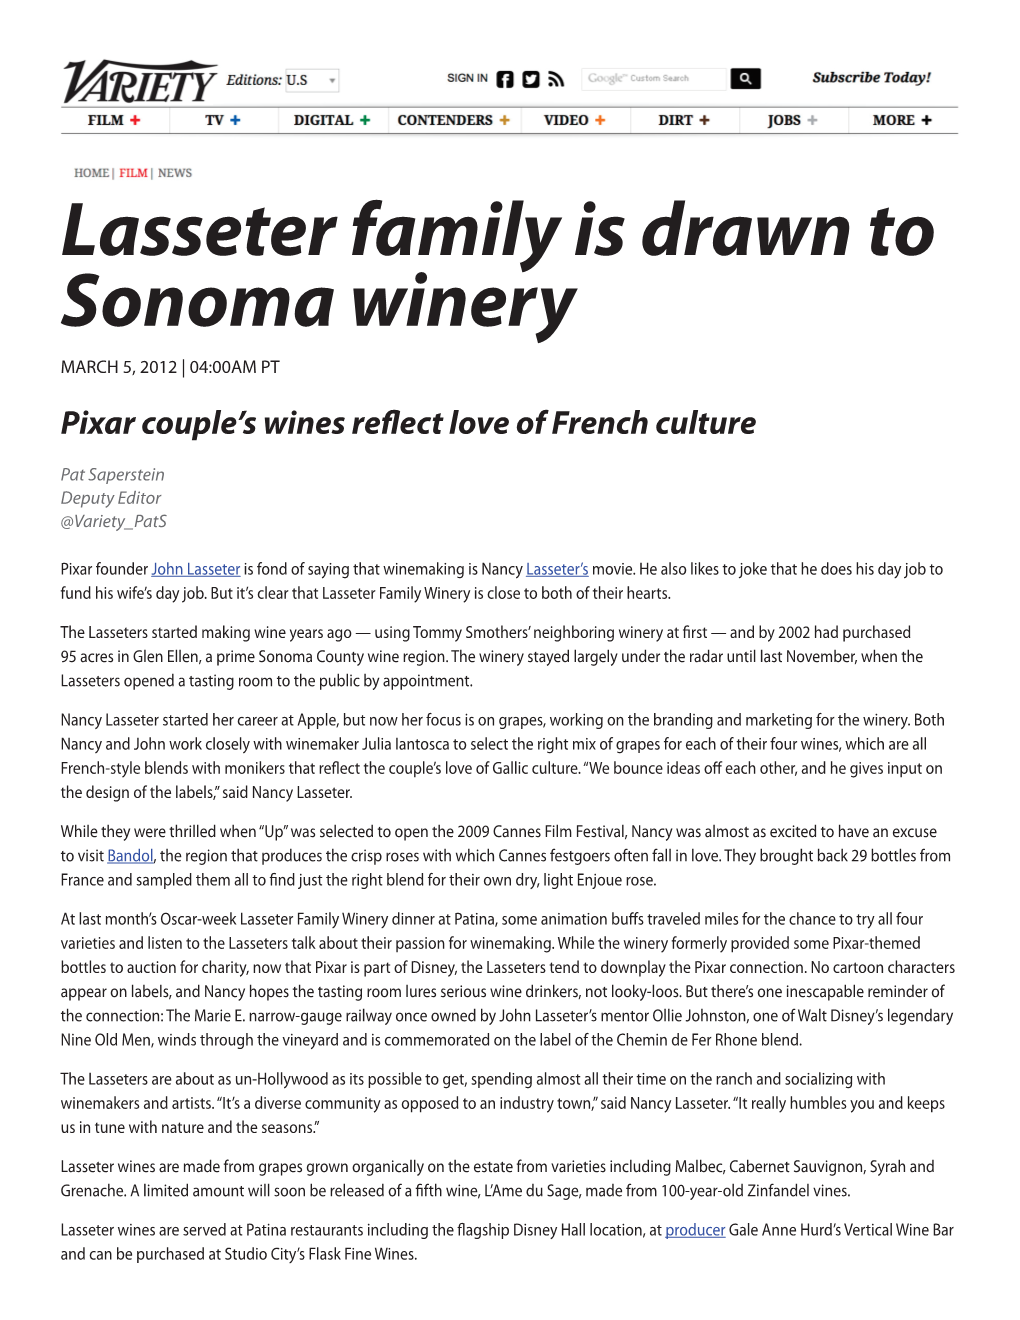 Lasseter Family Is Drawn to Sonoma Winery MARCH 5, 2012 | 04:00AM PT Pixar Couple’S Wines Reflect Love of French Culture